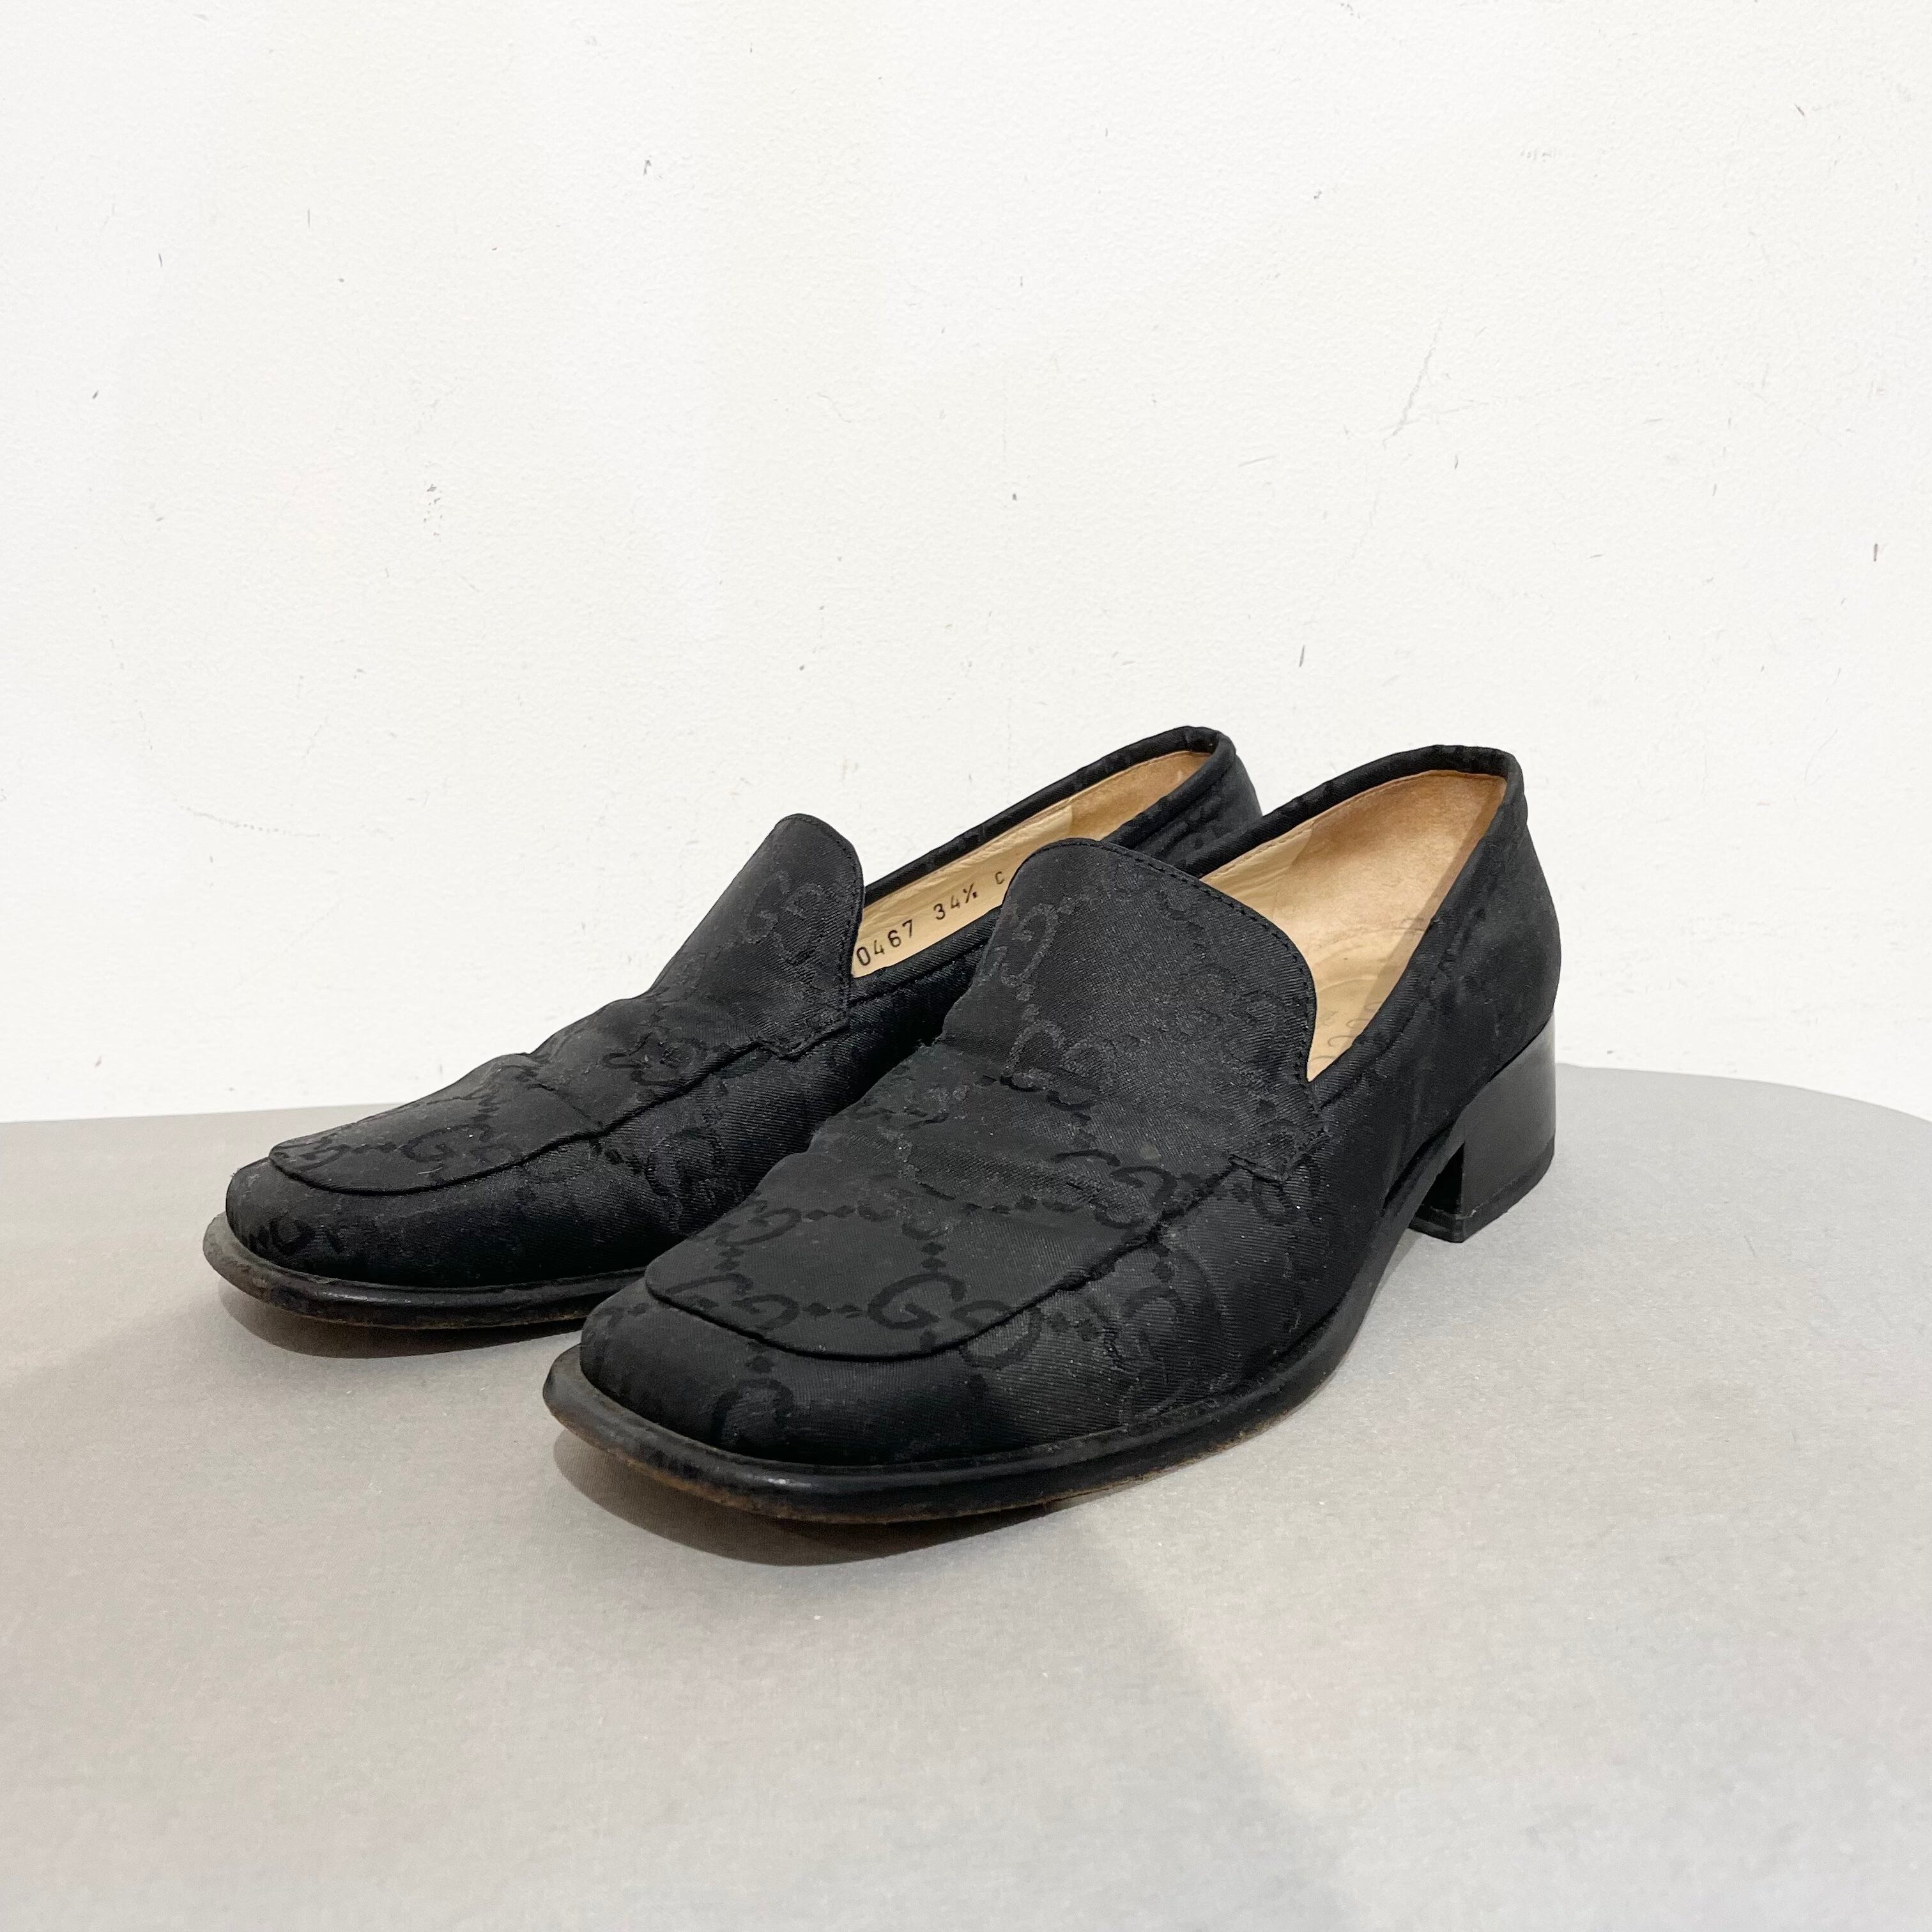 GUCCI/shoes/Loafer/heal/black/グッチ/ローファー/ヒール/黒 | ＵＴＡ５